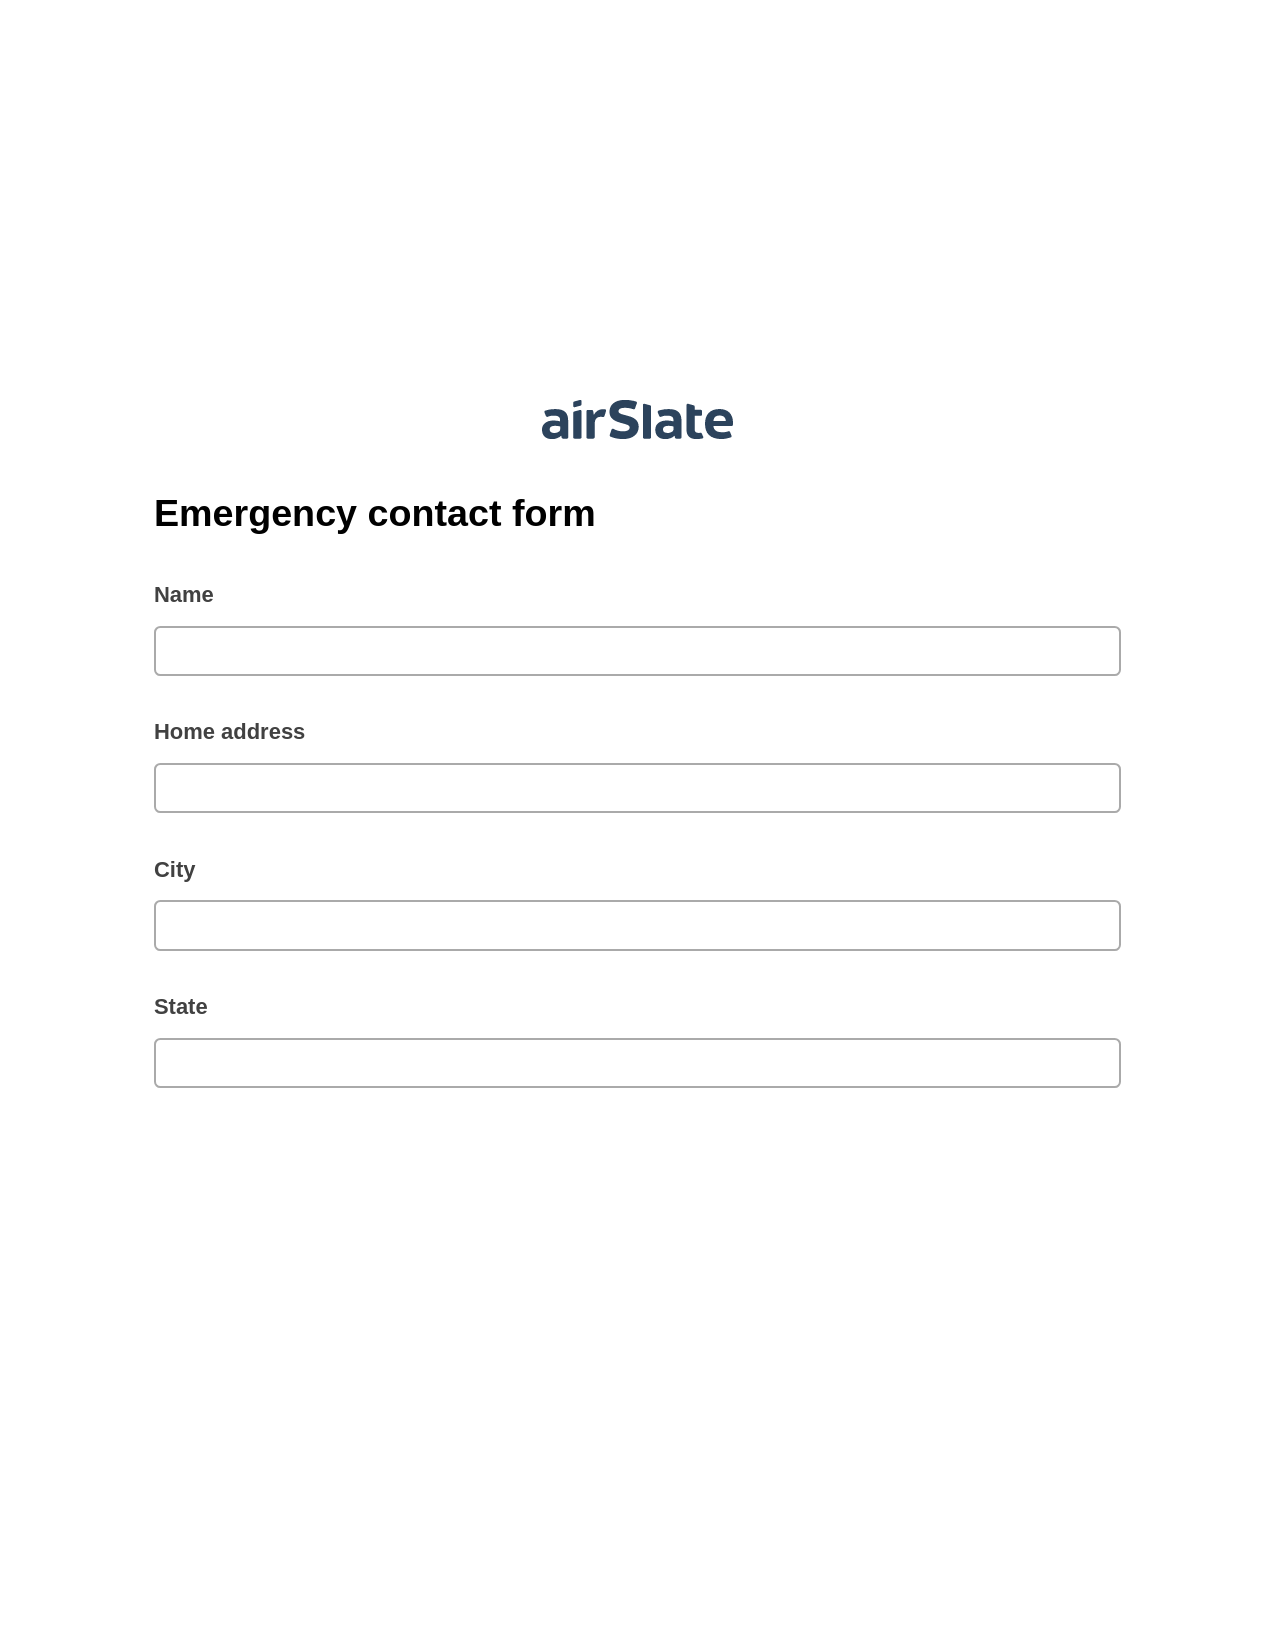 Emergency contact form Pre-fill from Salesforce Record Bot, Mailchimp send Campaign bot, Export to Excel 365 Bot